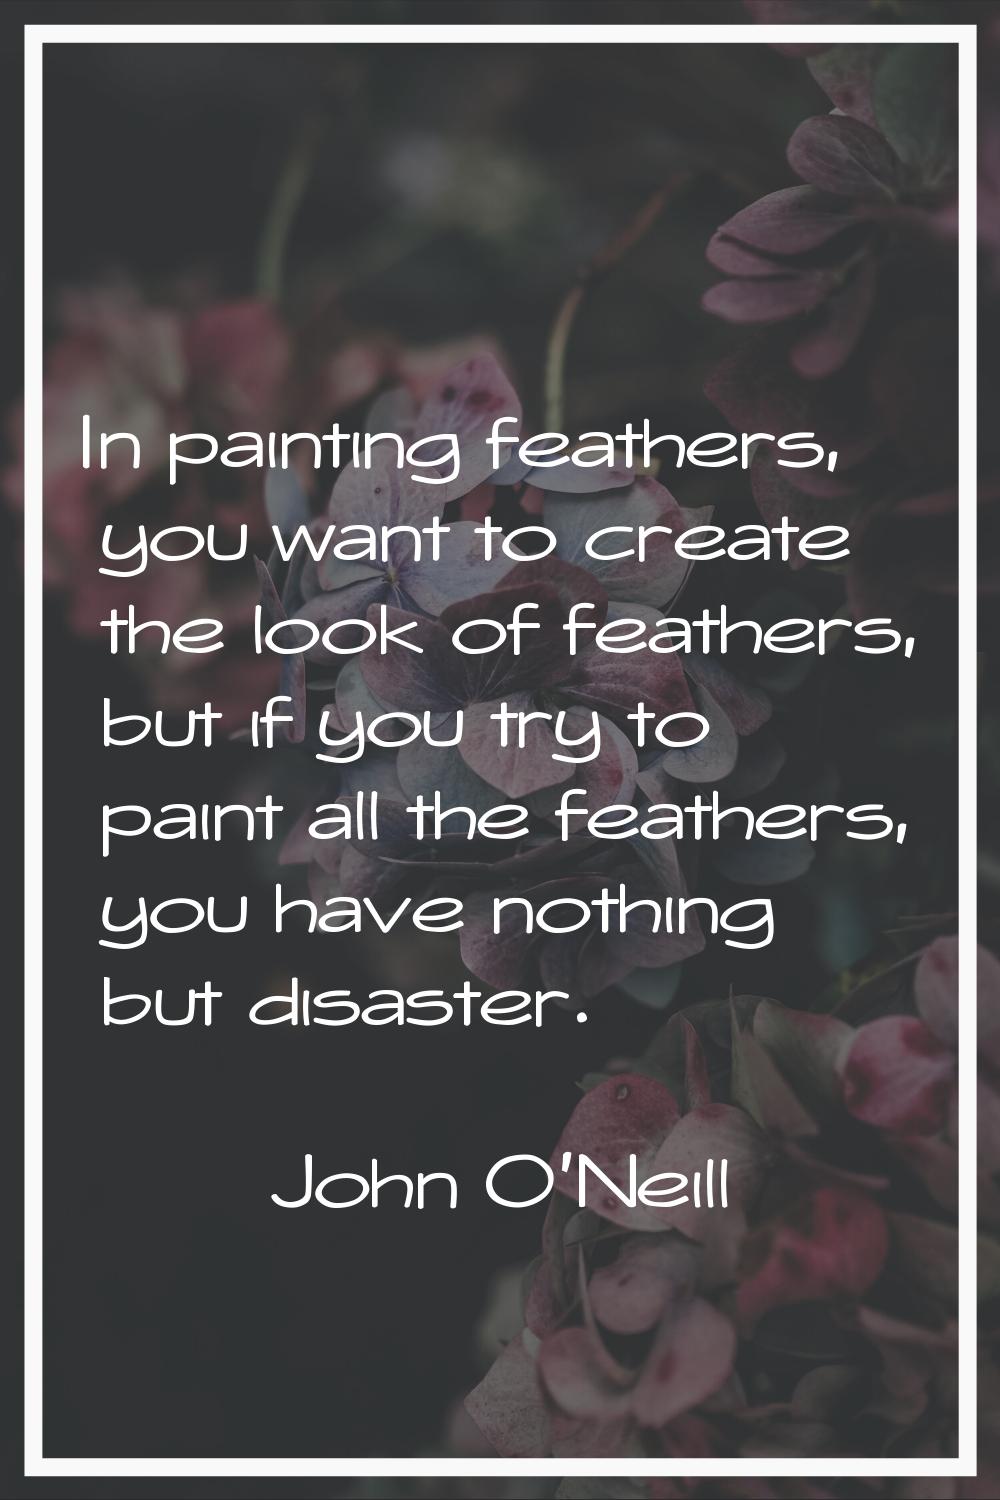 In painting feathers, you want to create the look of feathers, but if you try to paint all the feat